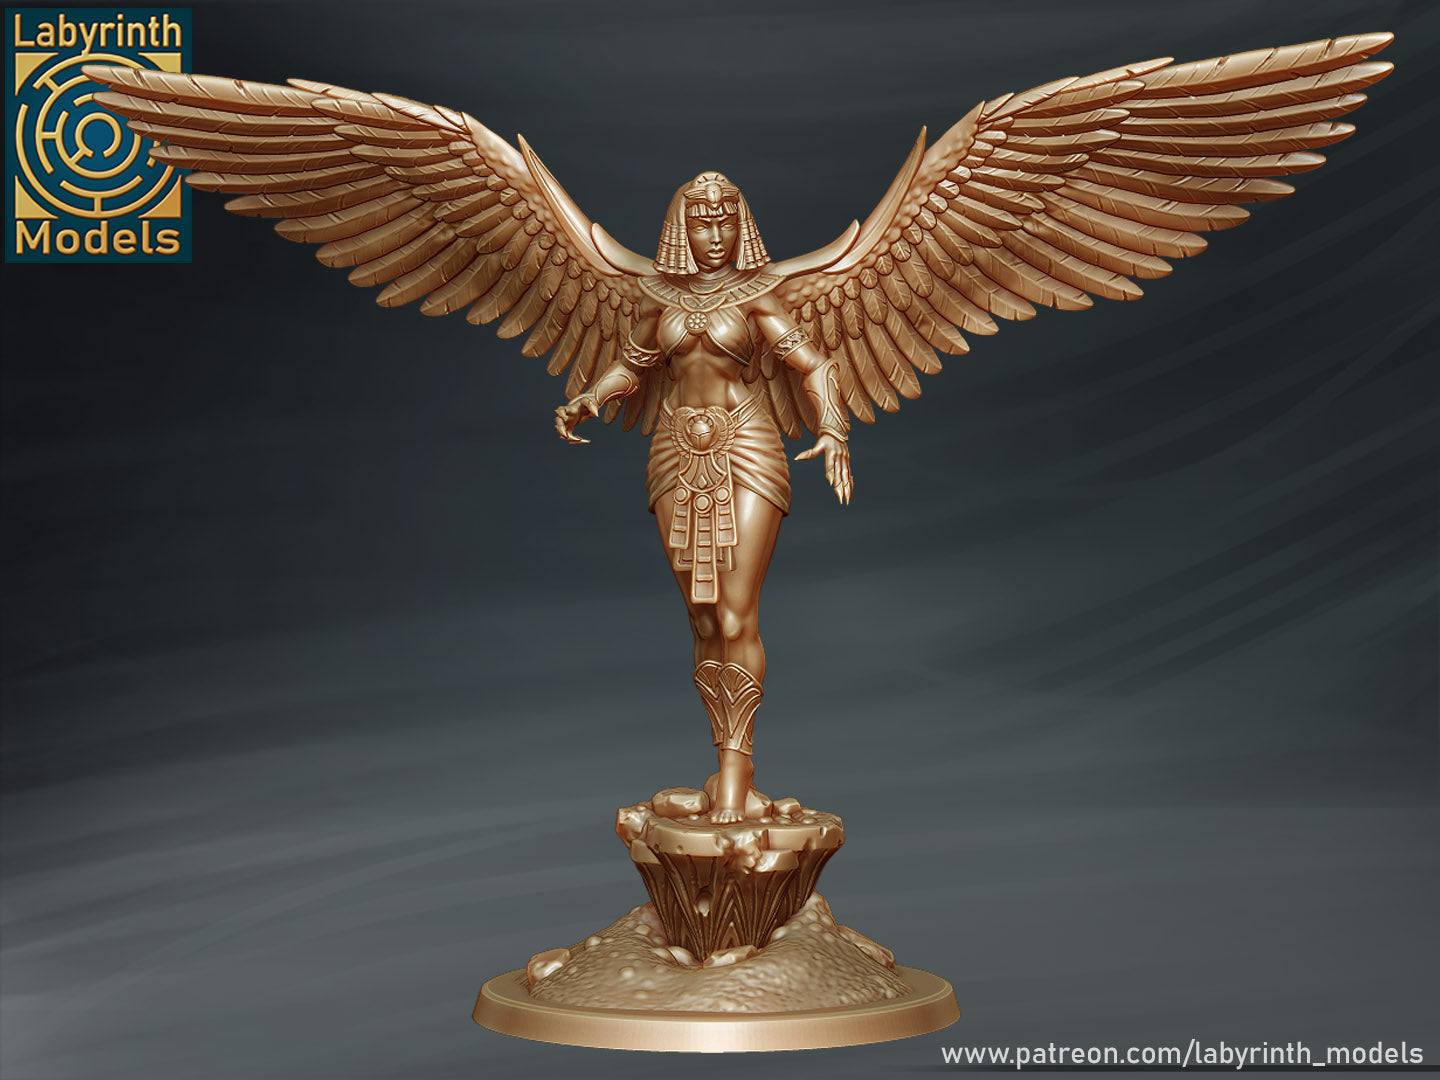 Sphinx 2 by Labyrinth Models